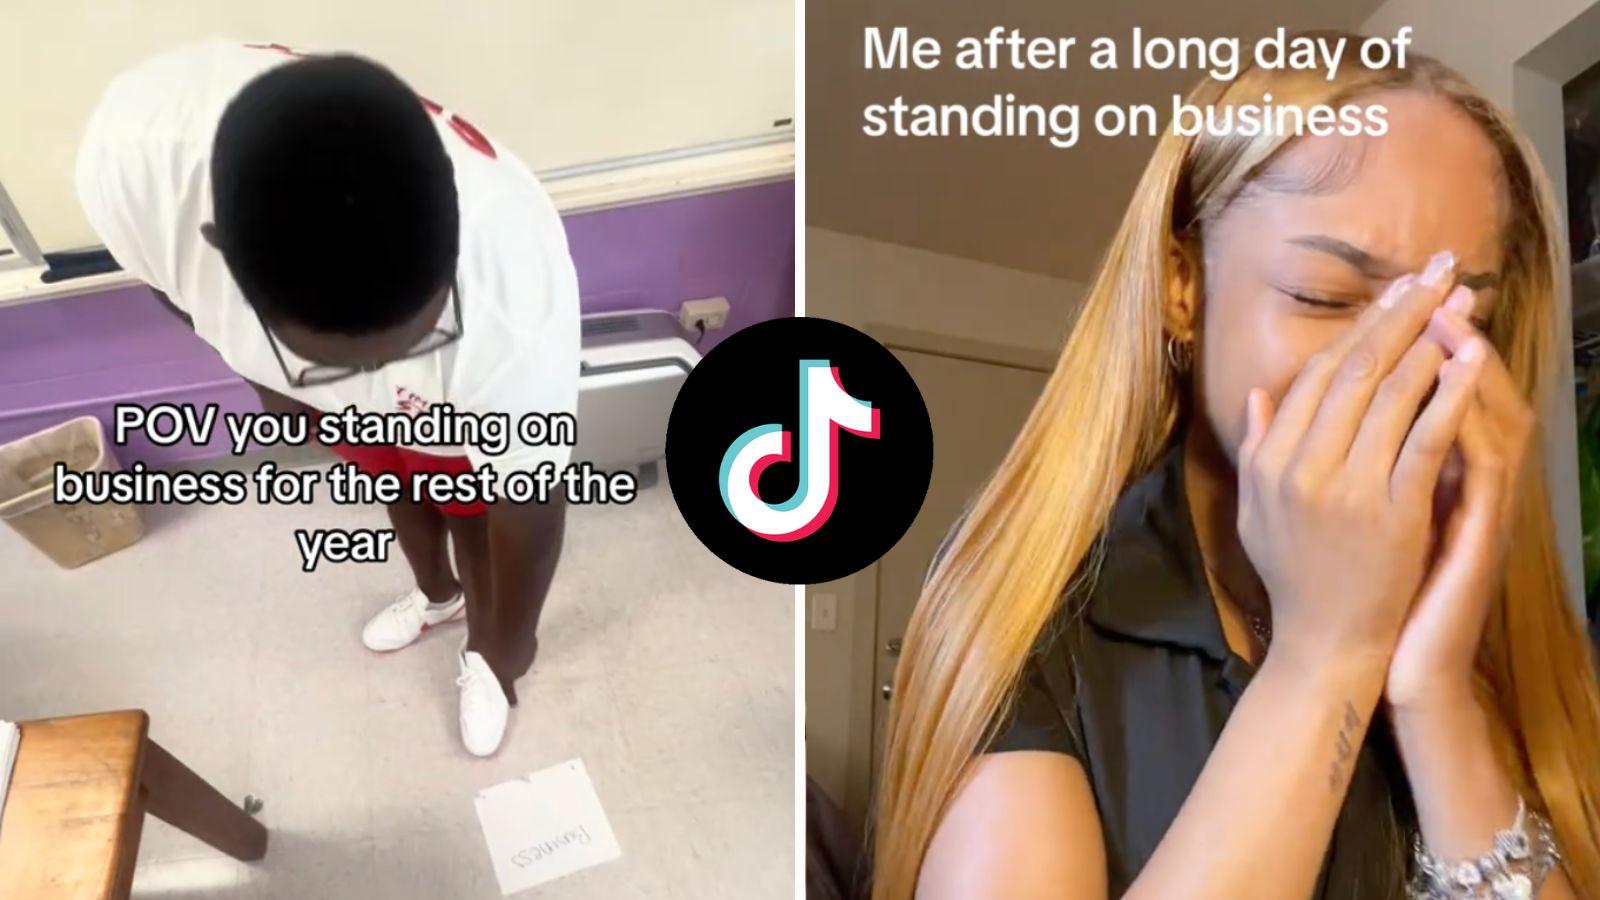 What does ‘standing on business’ mean on TikTok?